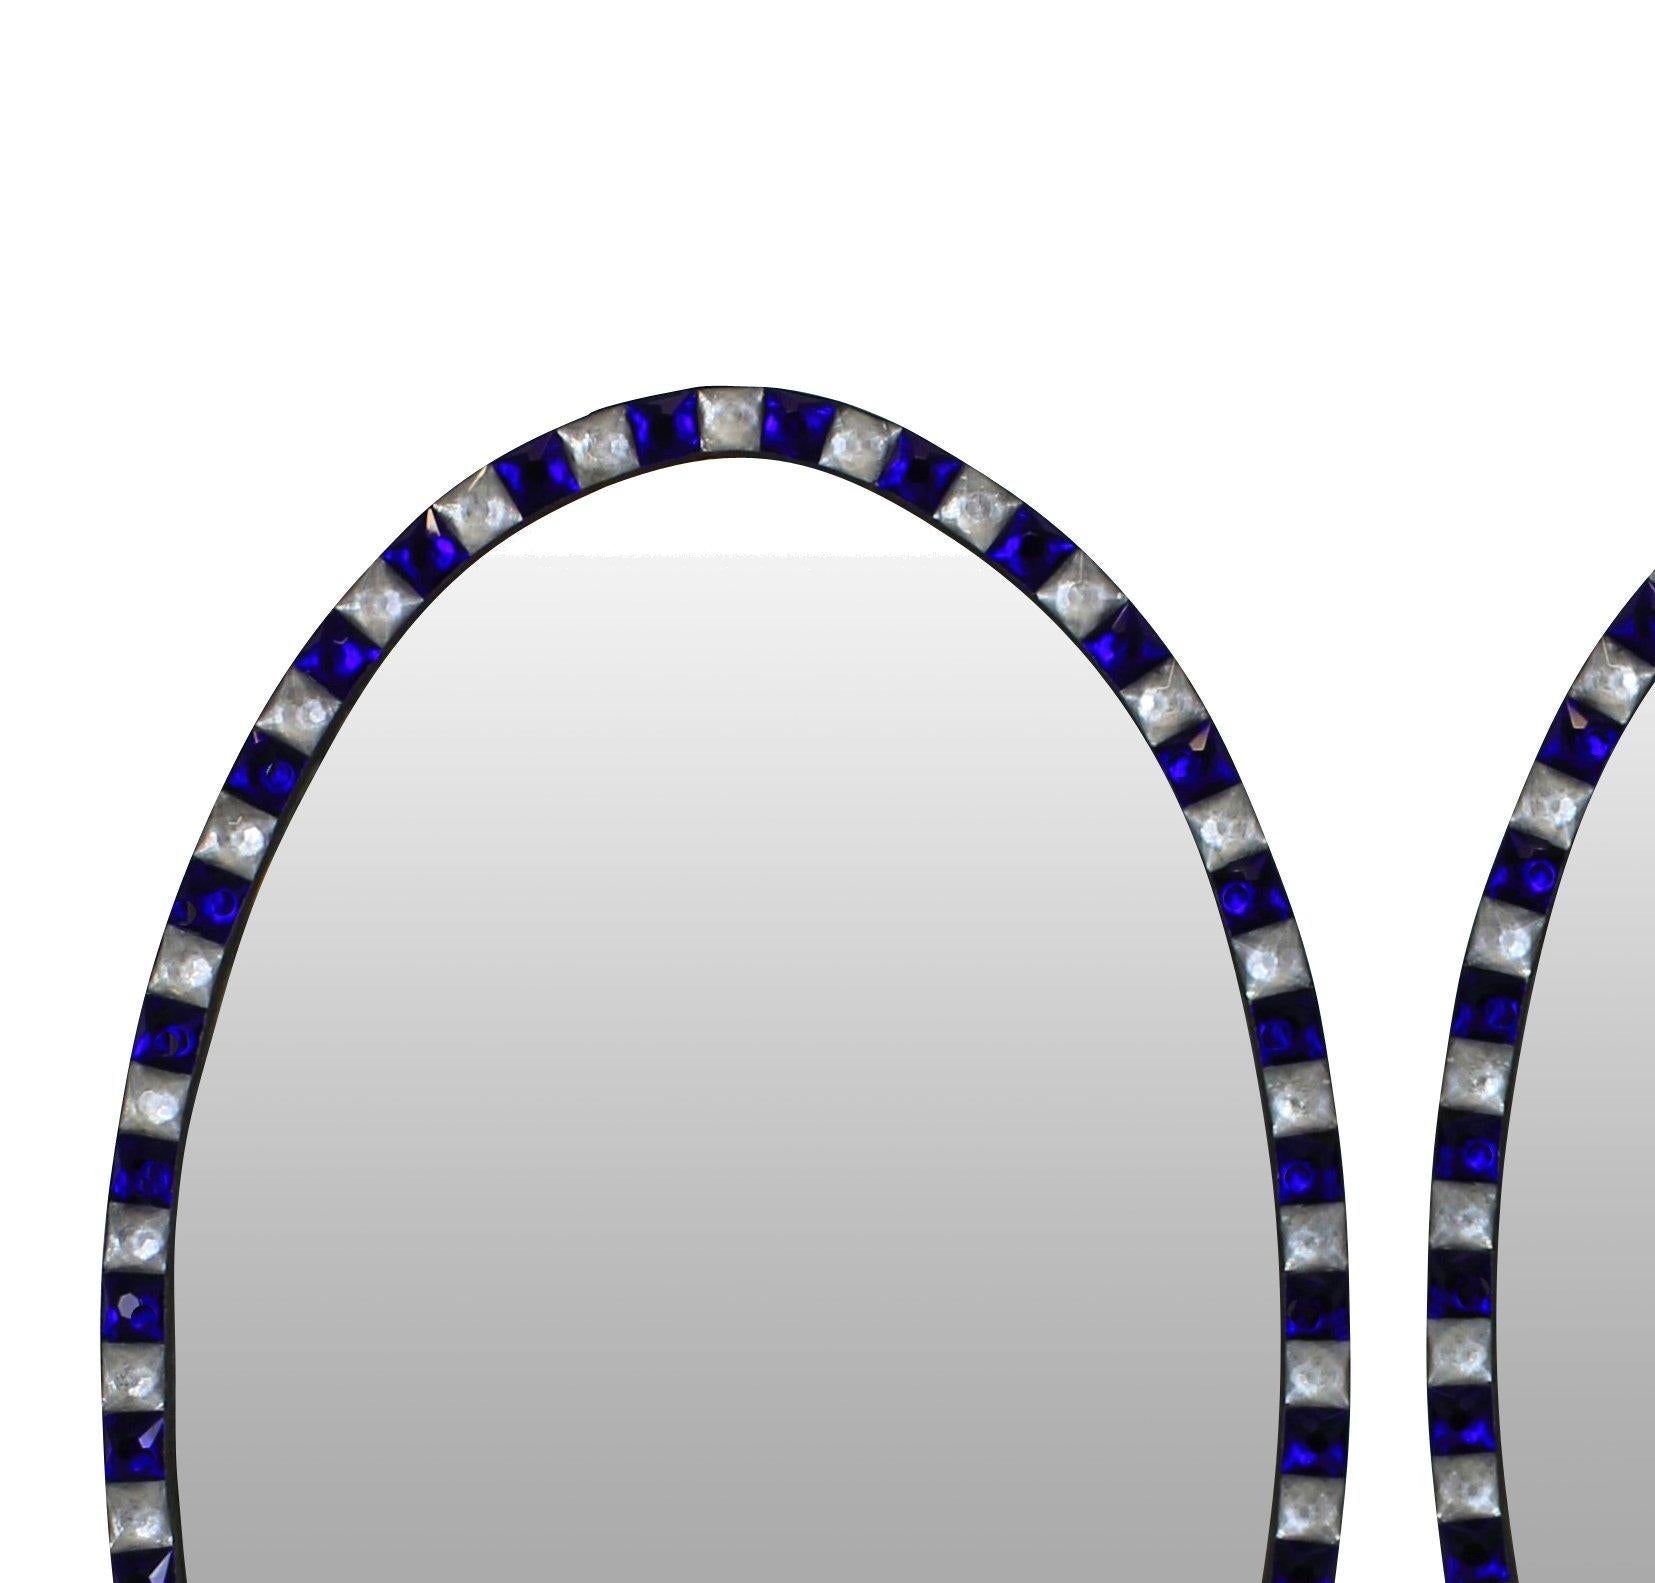 Pair of Stunning Irish Mirrors with Faceted Rock Crystal and Blue Glass Borders (Irisch)